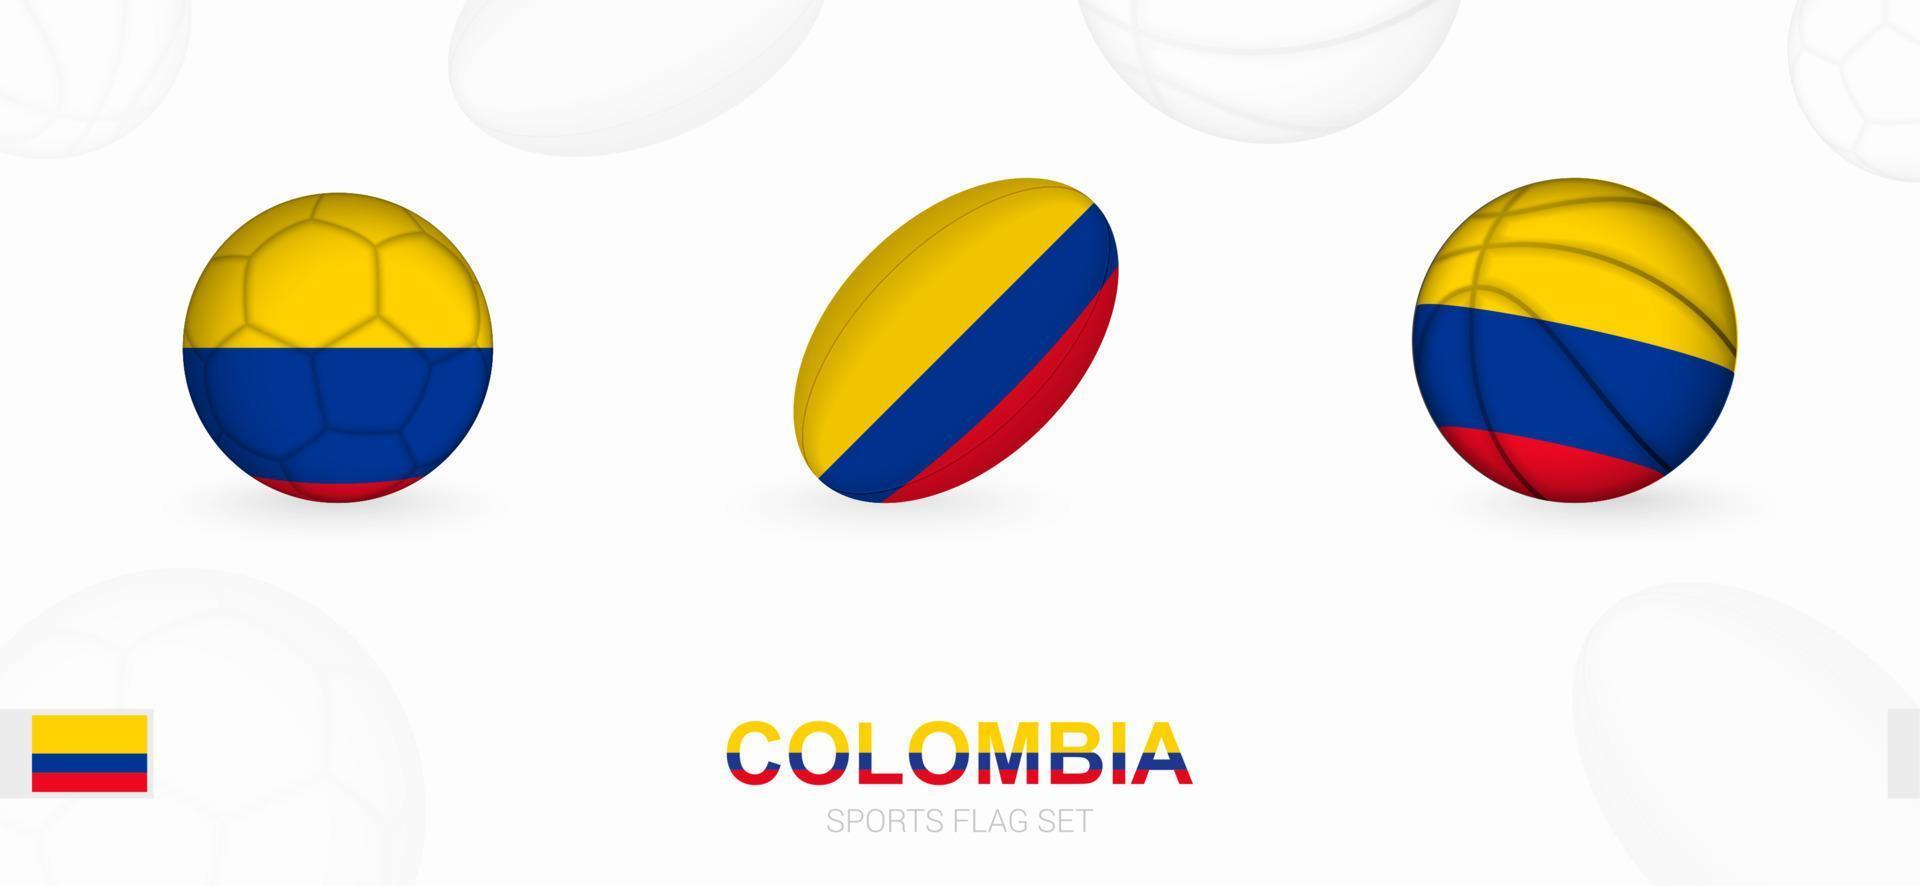 Sports icons for football, rugby and basketball with the flag of Colombia. vector